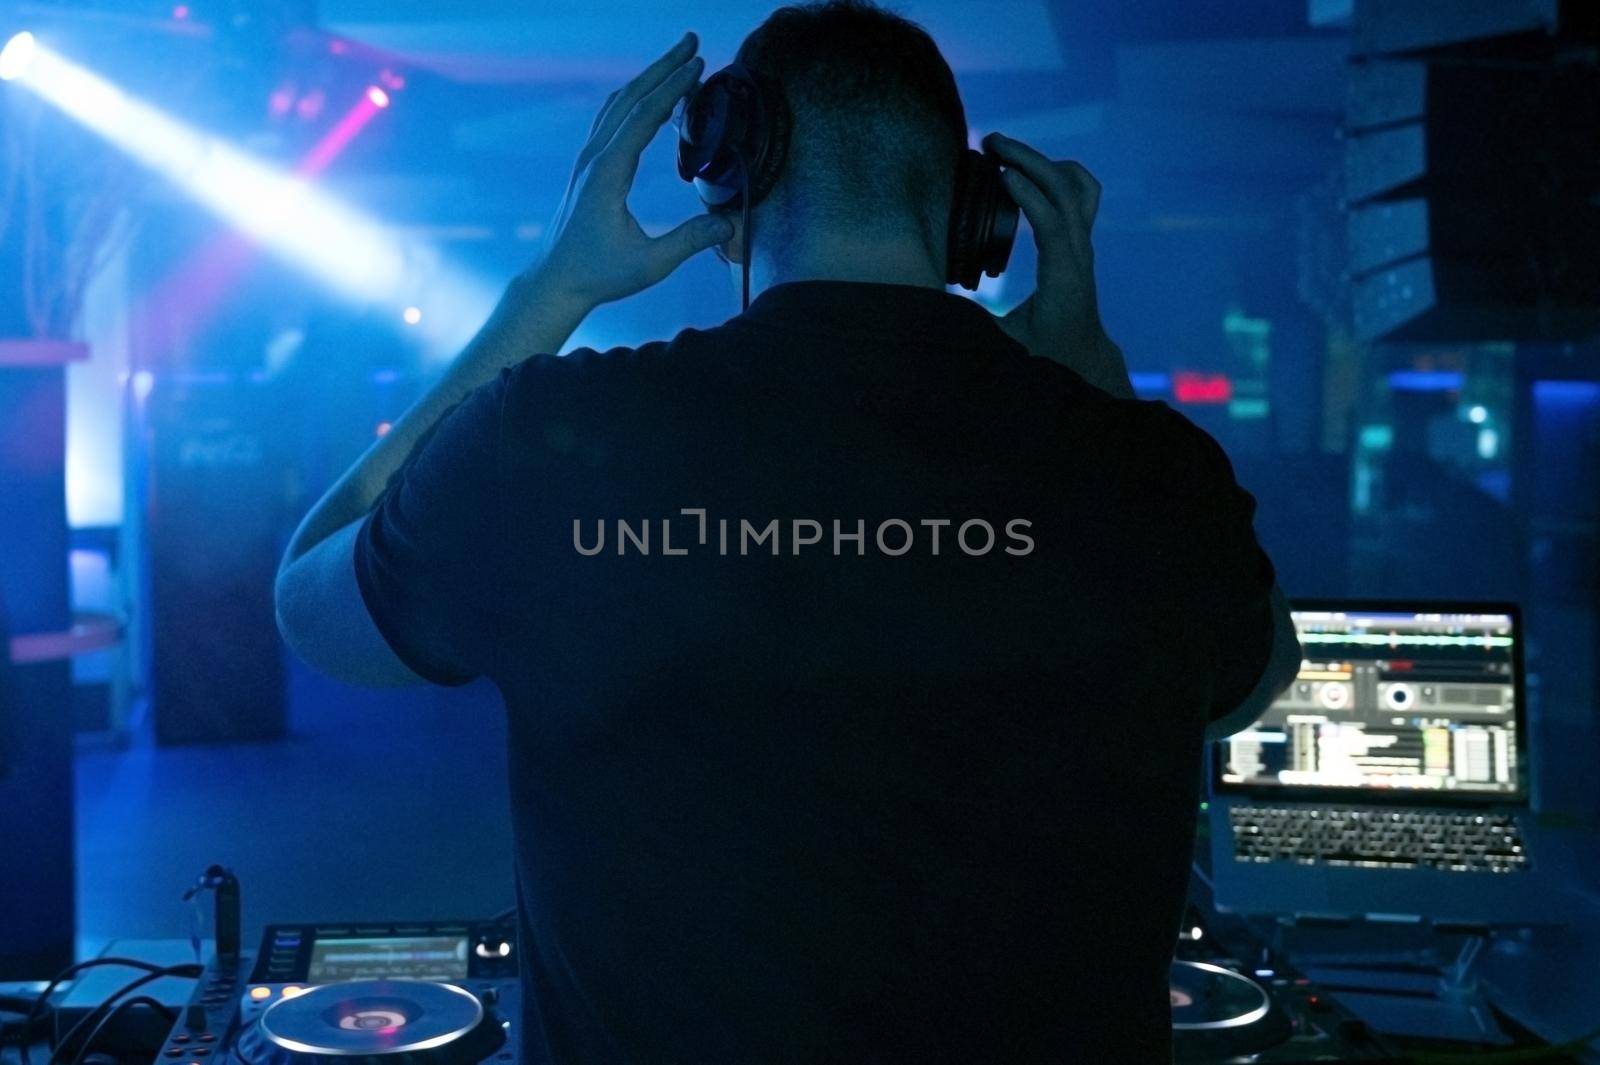 Dj mixing at party festival with light and smoke in background - Summer nightlife view of disco club inside.High quality Photography.